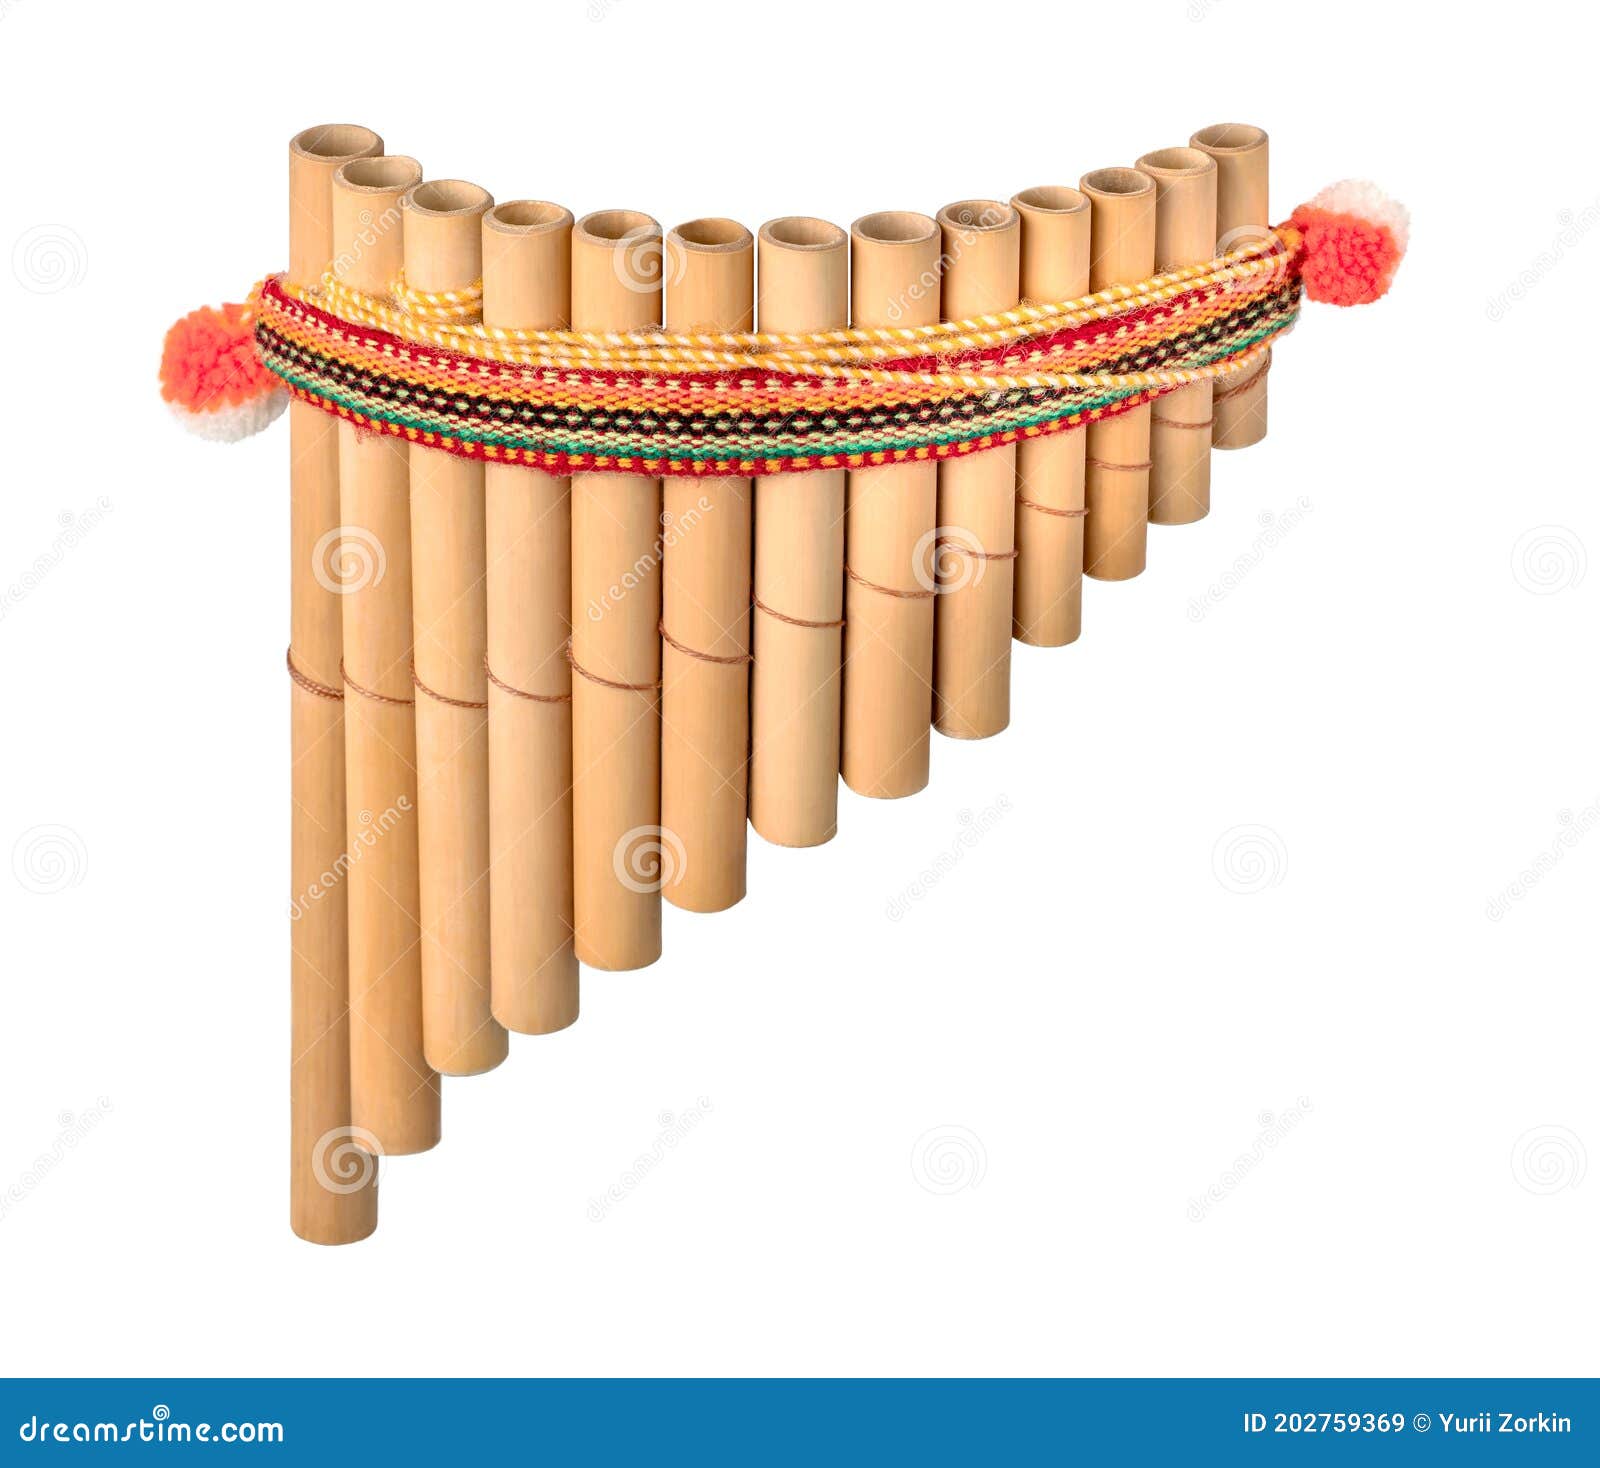 Multi-barrel Flute Isolated on White Background. South American National  Musical Instrument Pan Flute Stock Image - Image of andes, folk: 202759369